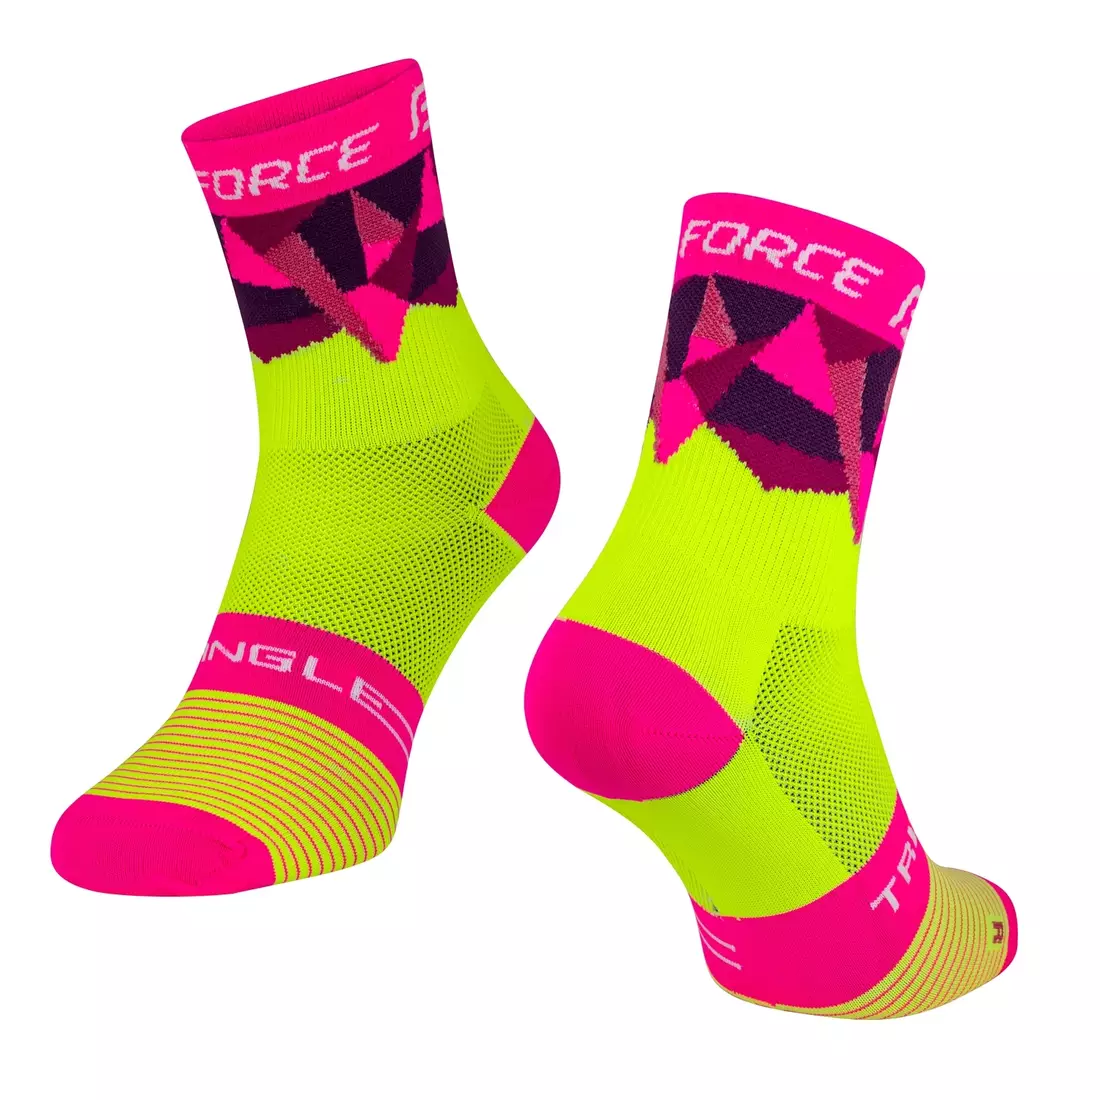 FORCE TRIANGLE cycling/sports socks, fluo-pink